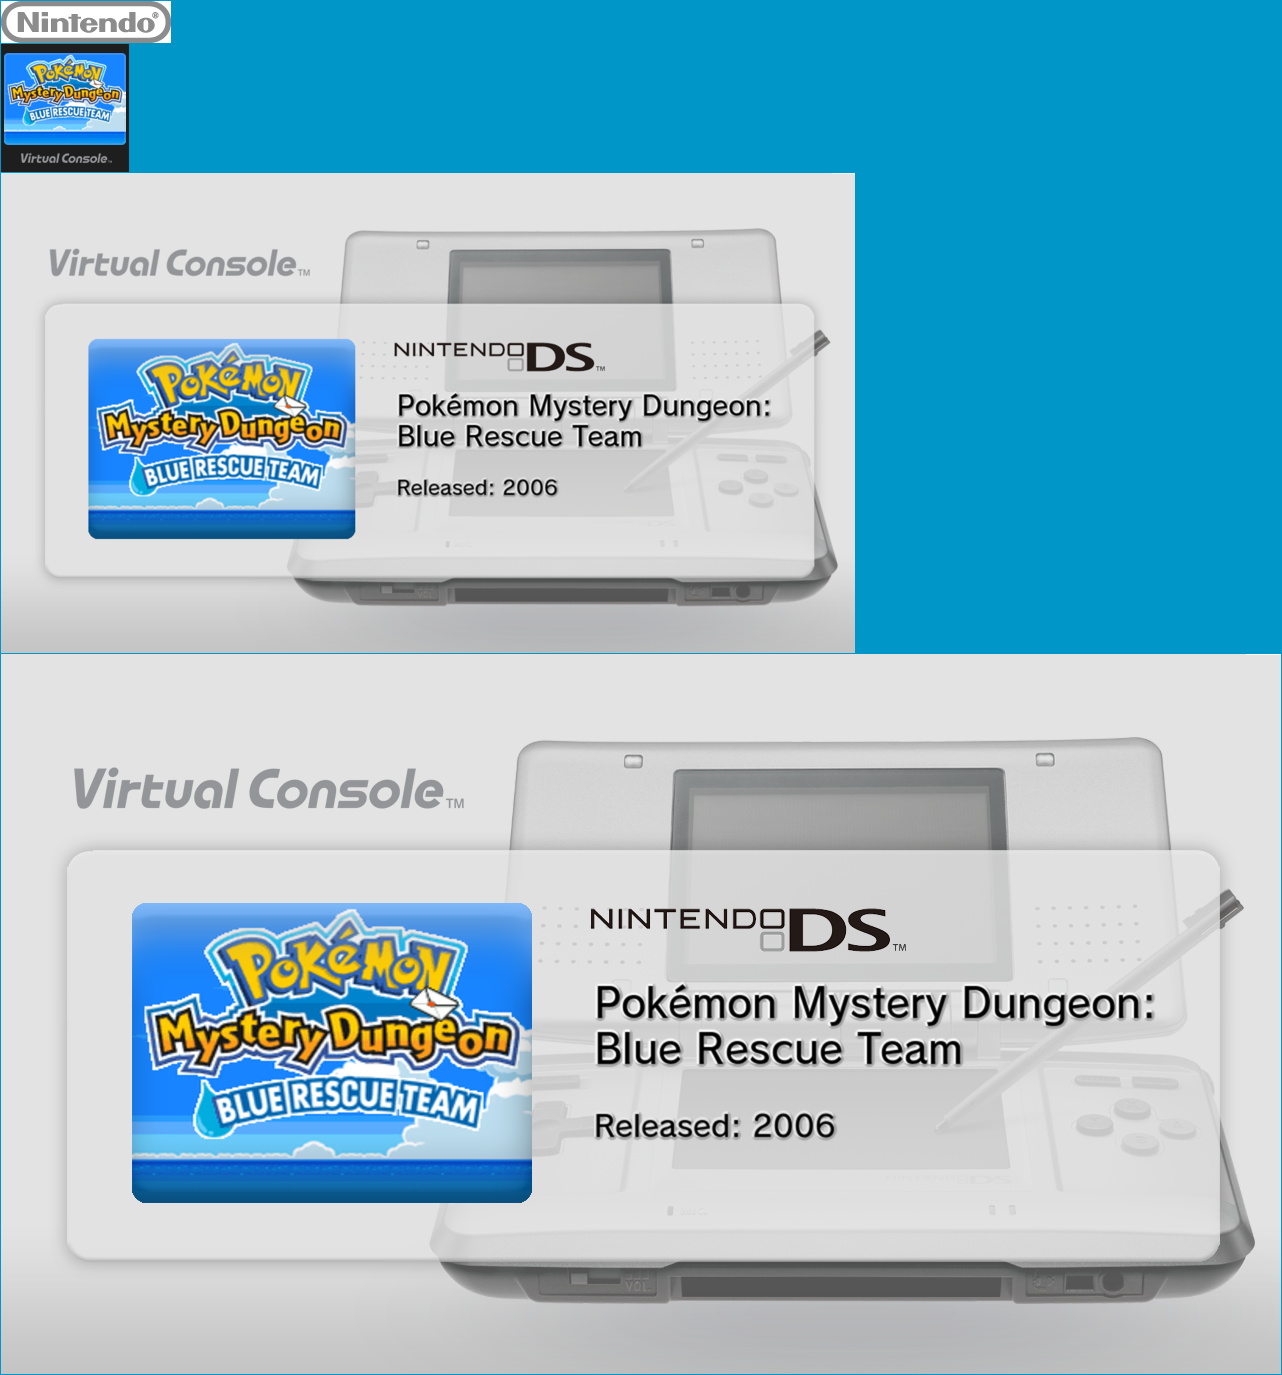 Virtual Console - Pokémon Mystery Dungeon: Blue Rescue Team